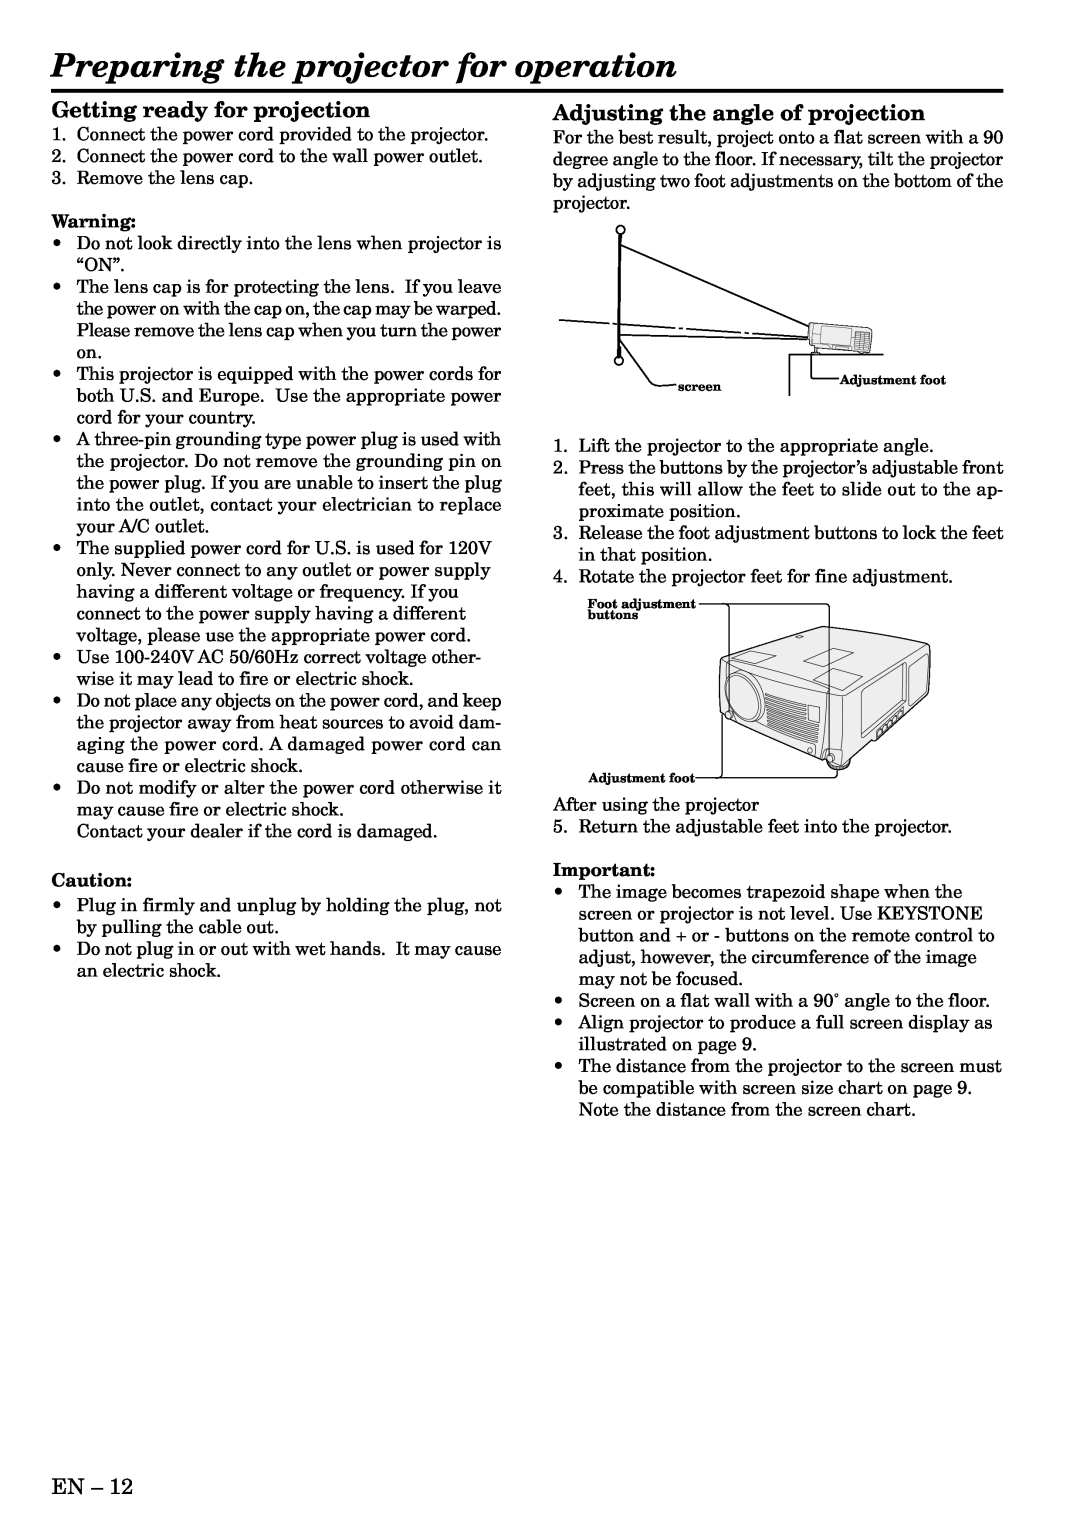 Mitsubishi Electronics X490, X500, S490 user manual Preparing the projector for operation, Getting ready for projection 